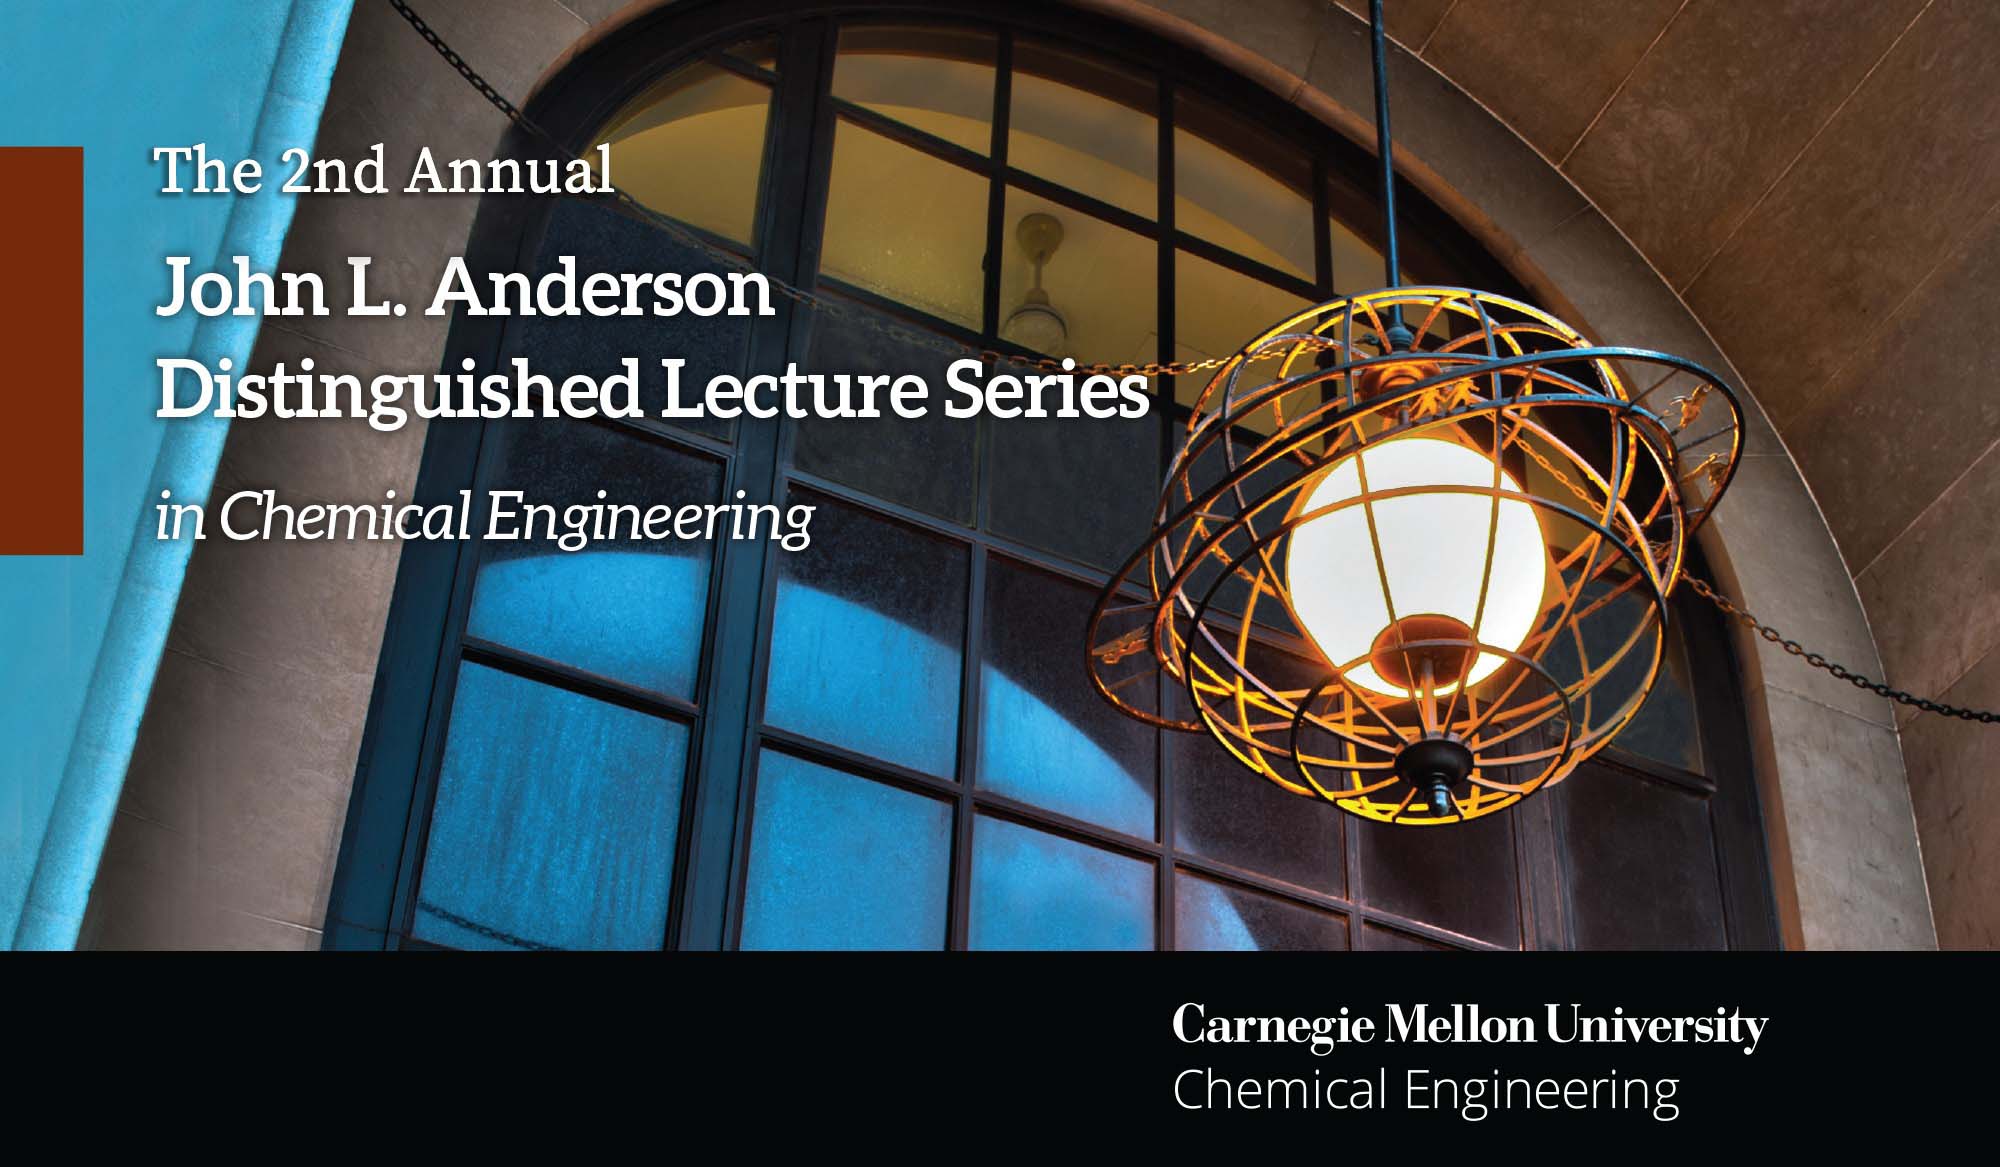 Image of chandelier outside Doherty Hall on CMU Campus - text over image reads "2nd Annual John L. Anderson Distinguished Lecture Series in Engineering